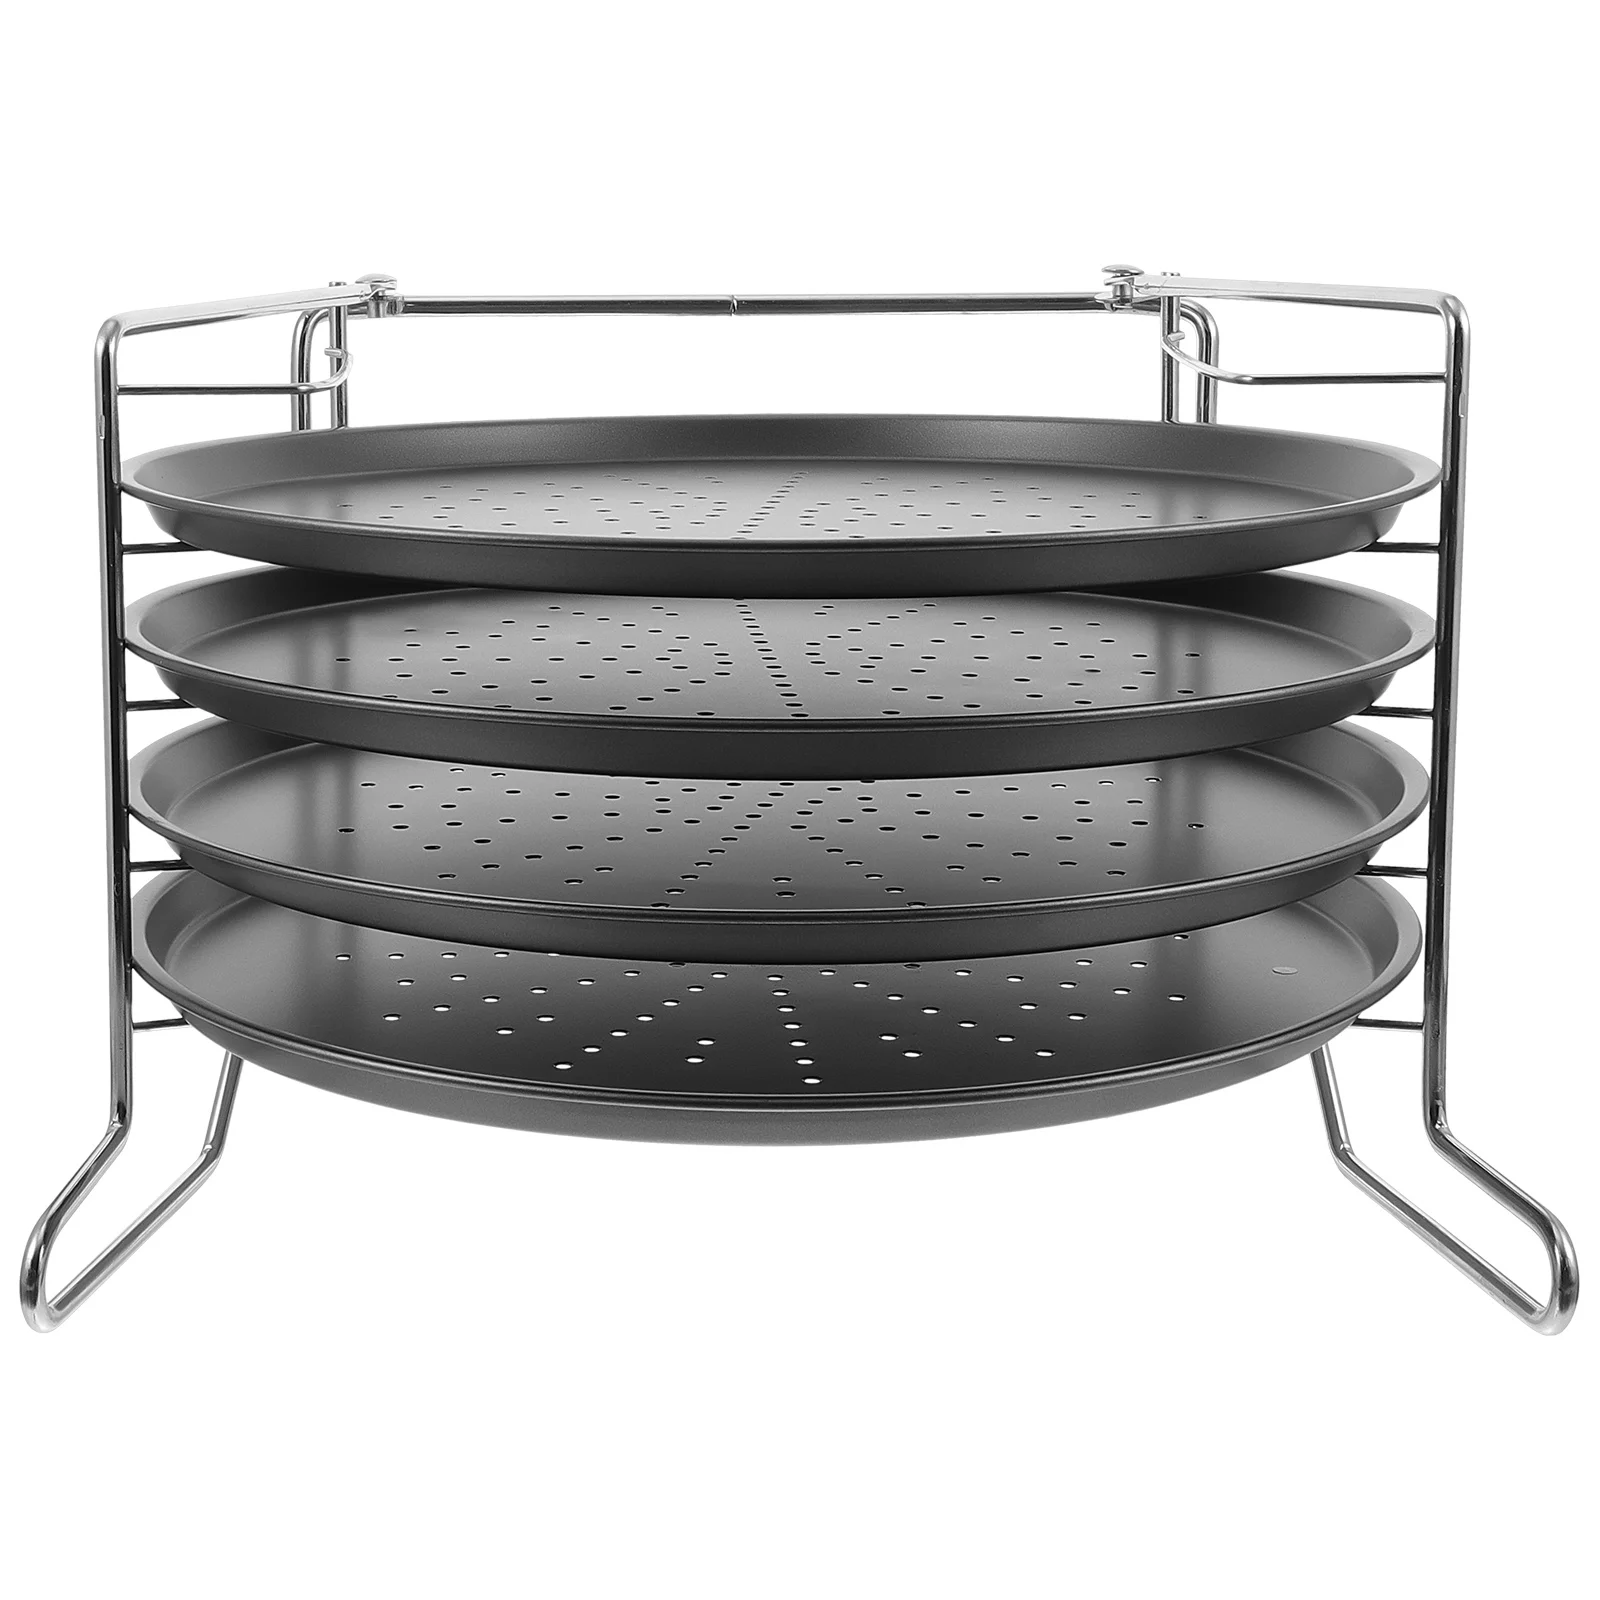 

Pizza Pan Baking Tray Oven Steel Stick Non Round Plate Aluminum Crisper Rack Carbon Pie Stainless Holes Microwave Pans Bakeware